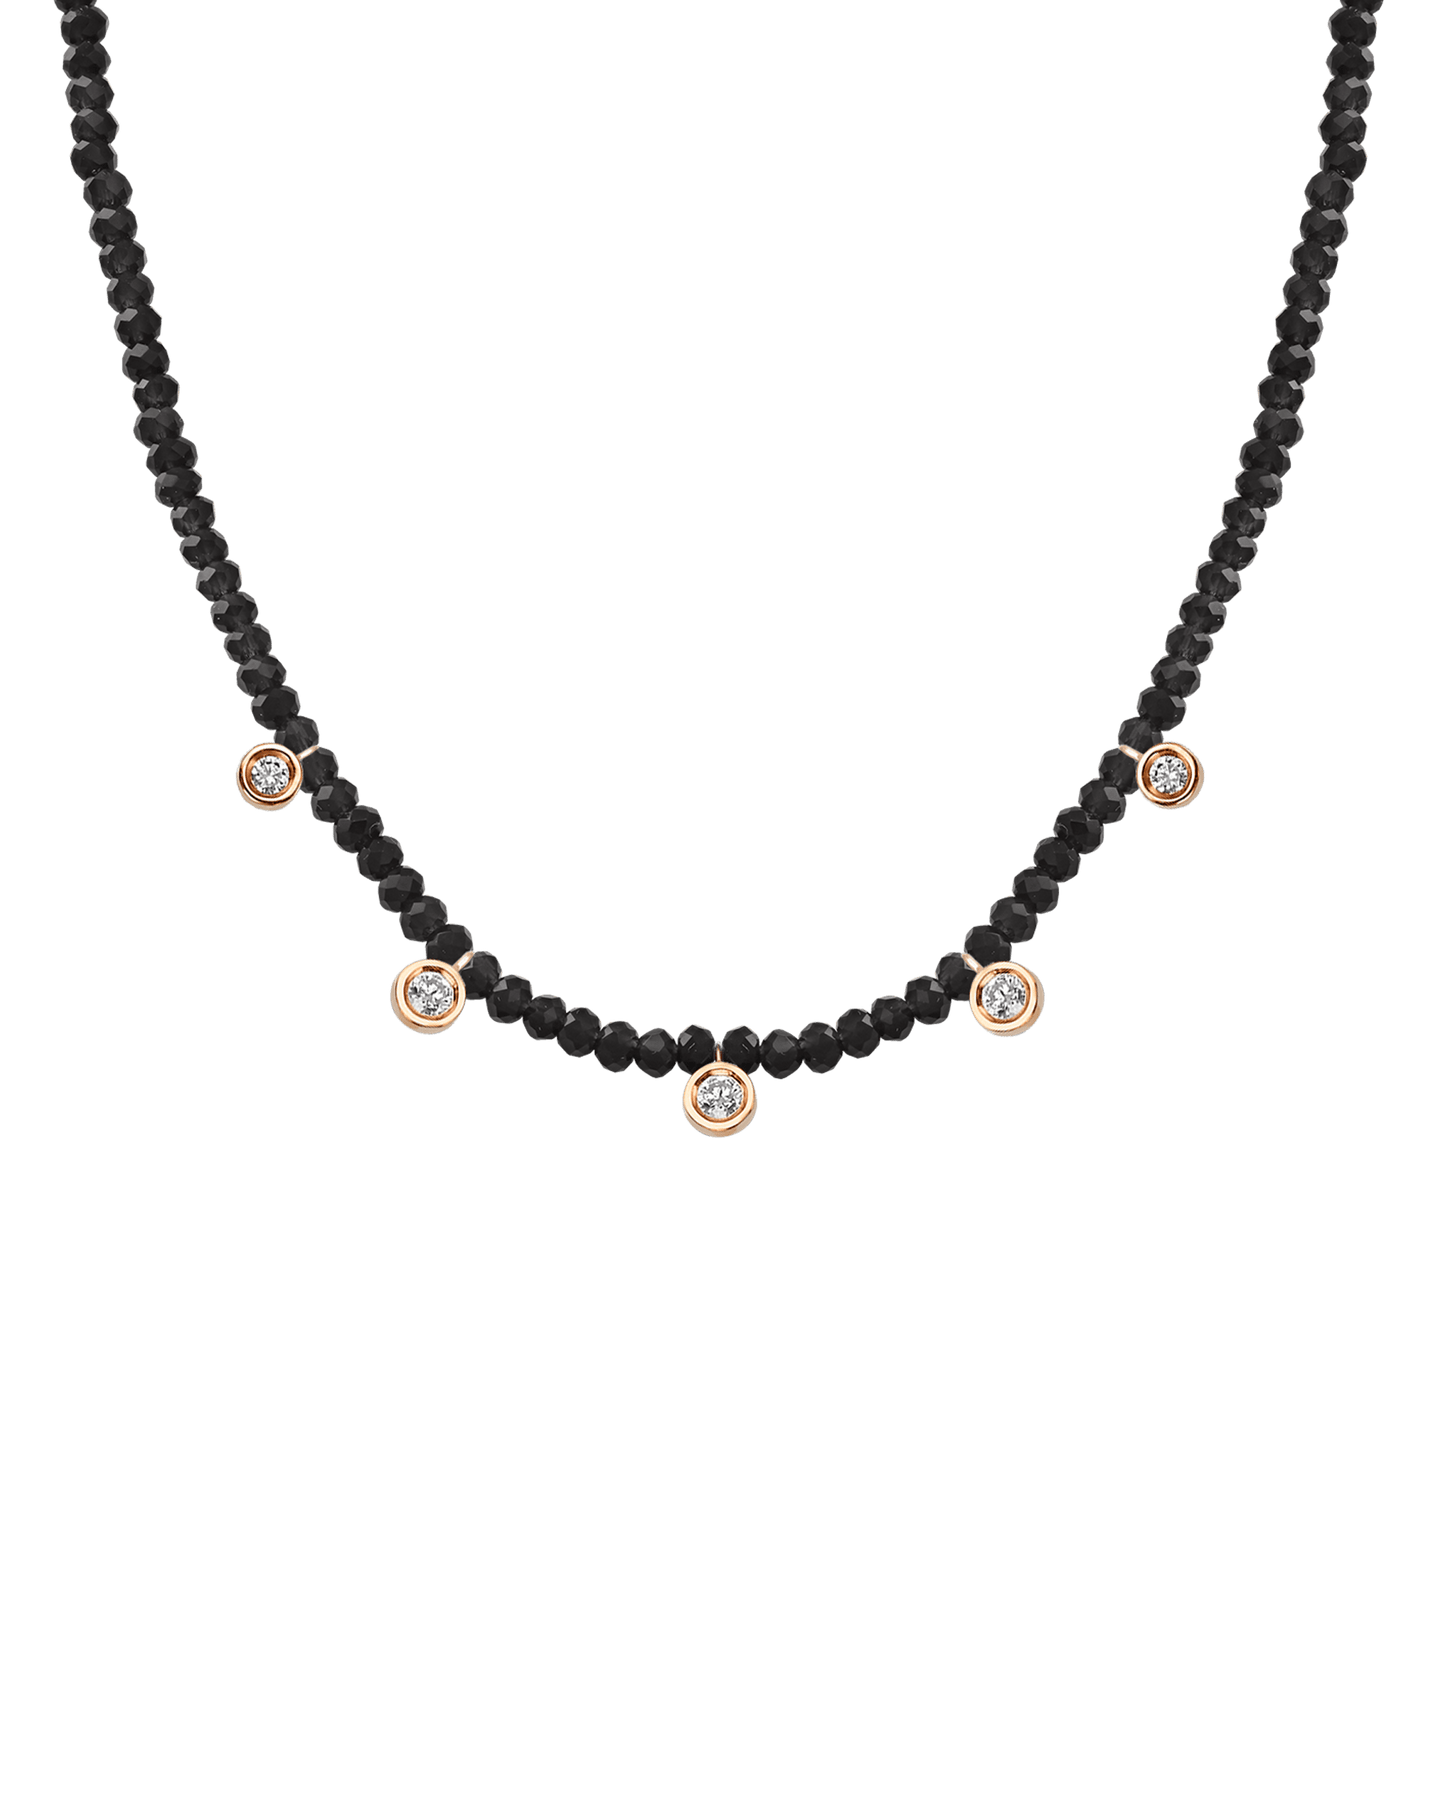 Emerald Gemstone & Five diamonds Necklace - 14K Rose Gold Necklaces magal-dev Glass Beads Black Spinnel 14" - Collar 